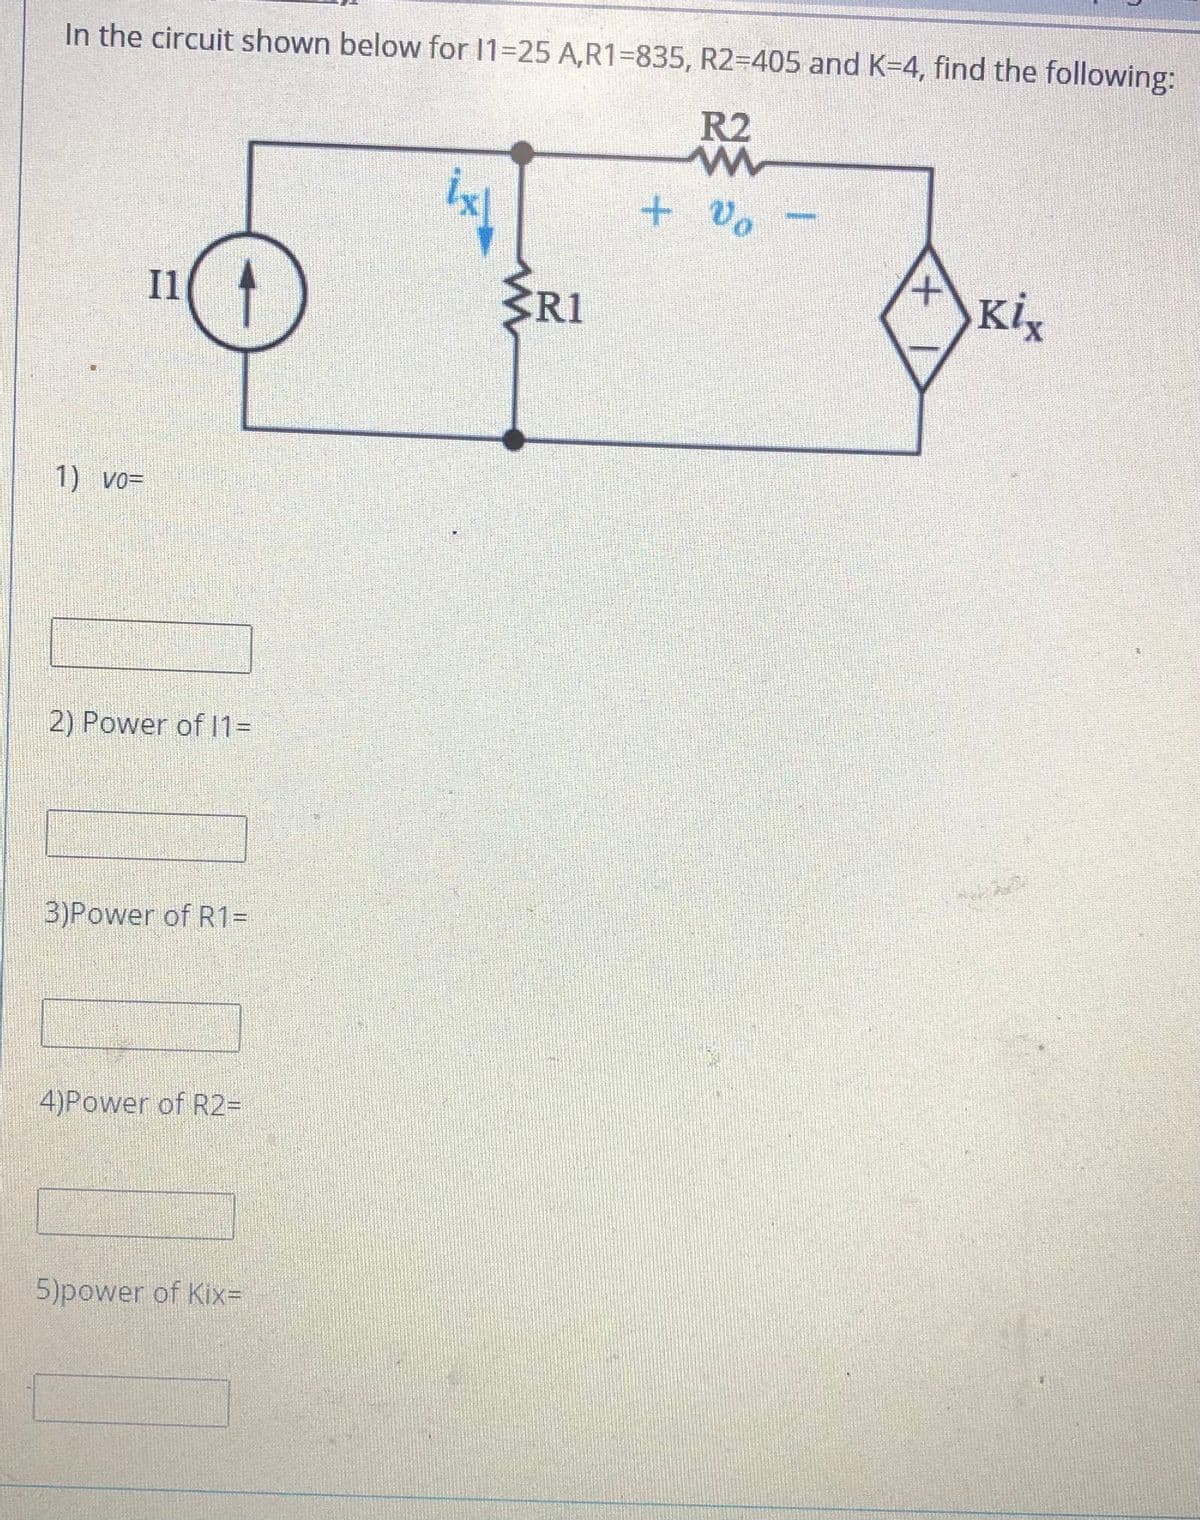 In the circuit shown below for 11-25 A,R1=835, R2=D405 and K=4, find the following:
R2
+ Vo
Il
R1
Kix
1) vo=
2) Power of 1D
3)Power of R1=
4)Power of R2D
5)power of Kix=
